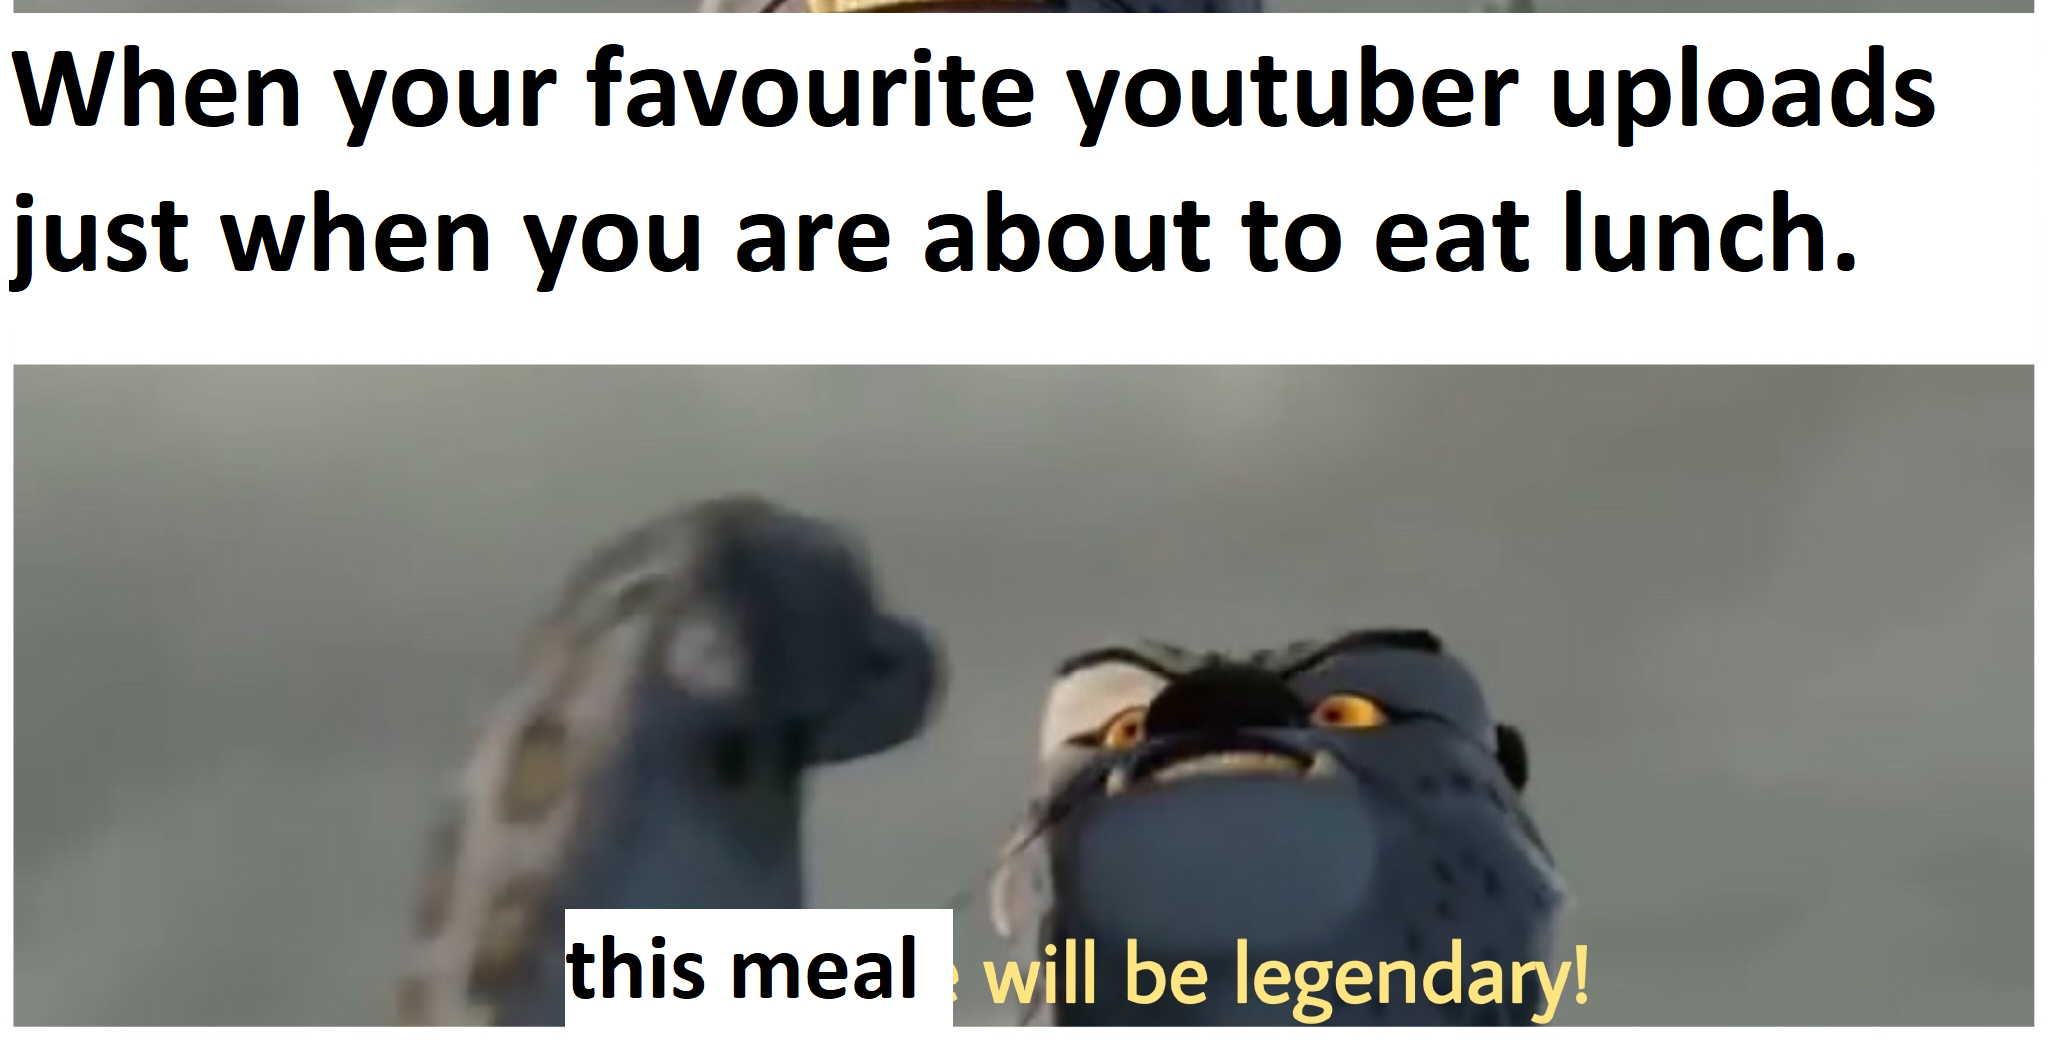 funny memes - flightless bird - When your favourite youtuber uploads just when you are about to eat lunch. this meal will be legendary!